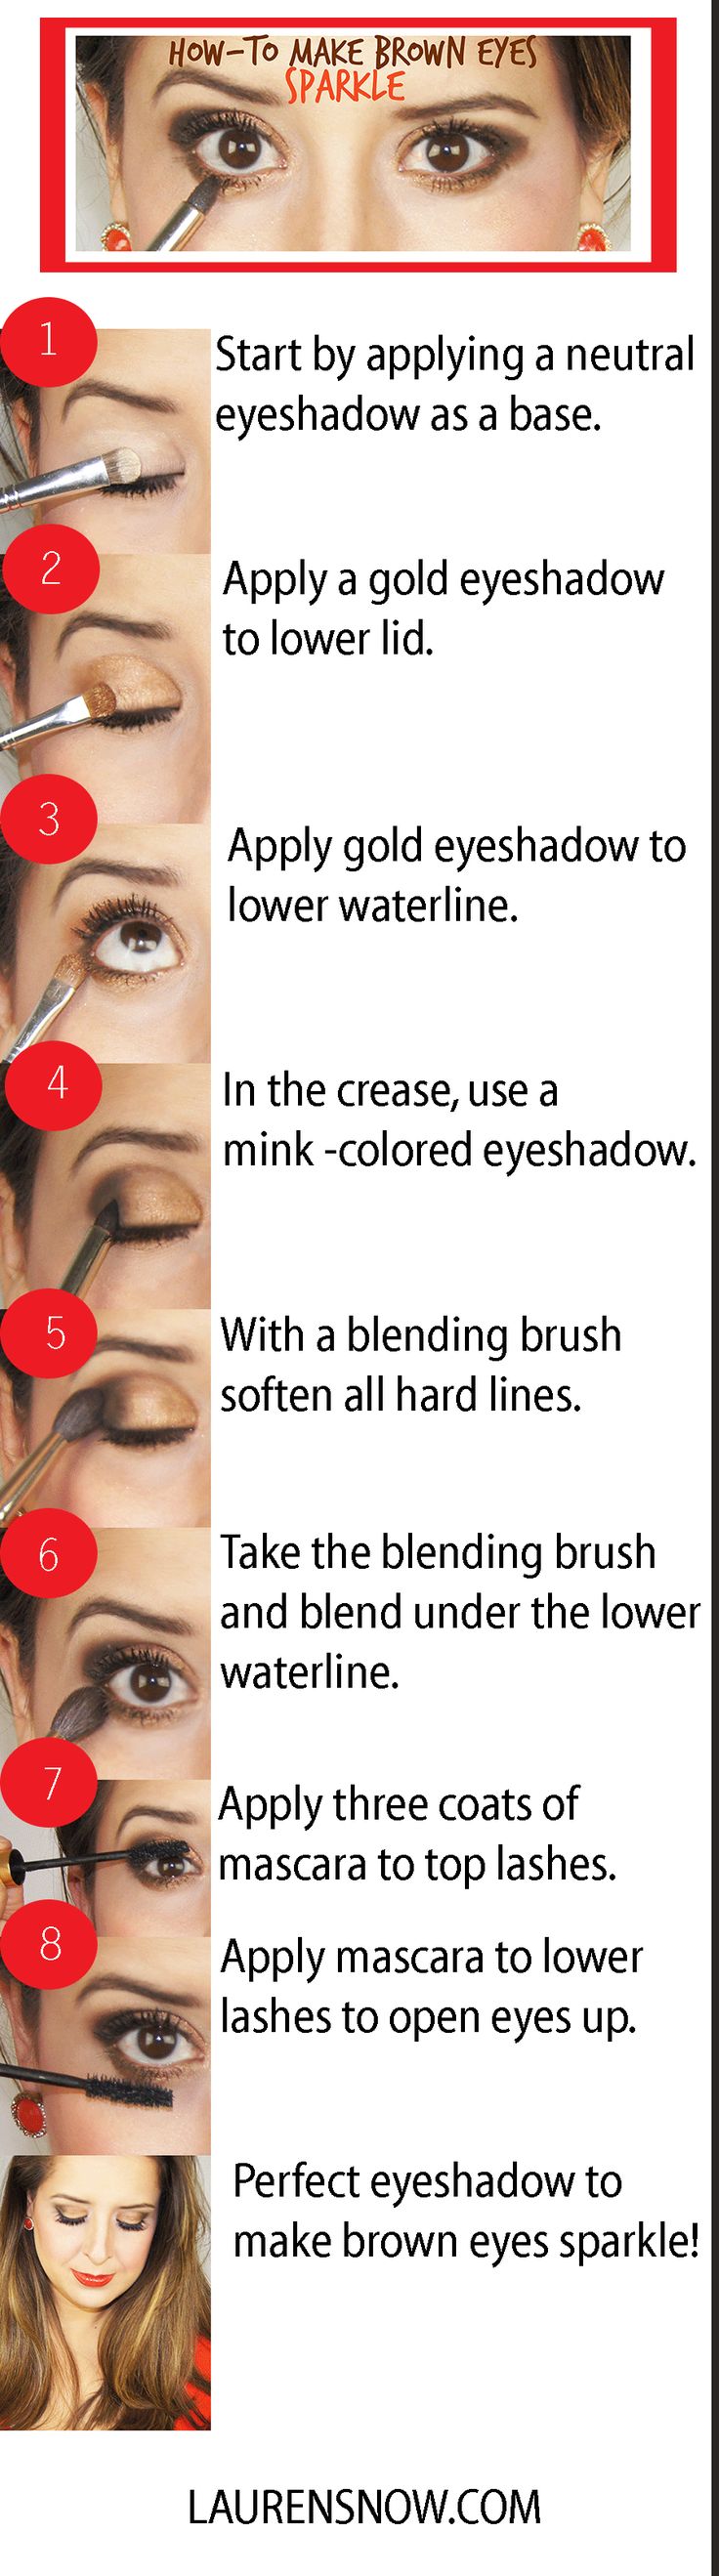 This is how I do my eyeshadow too but I would use lighter colors.